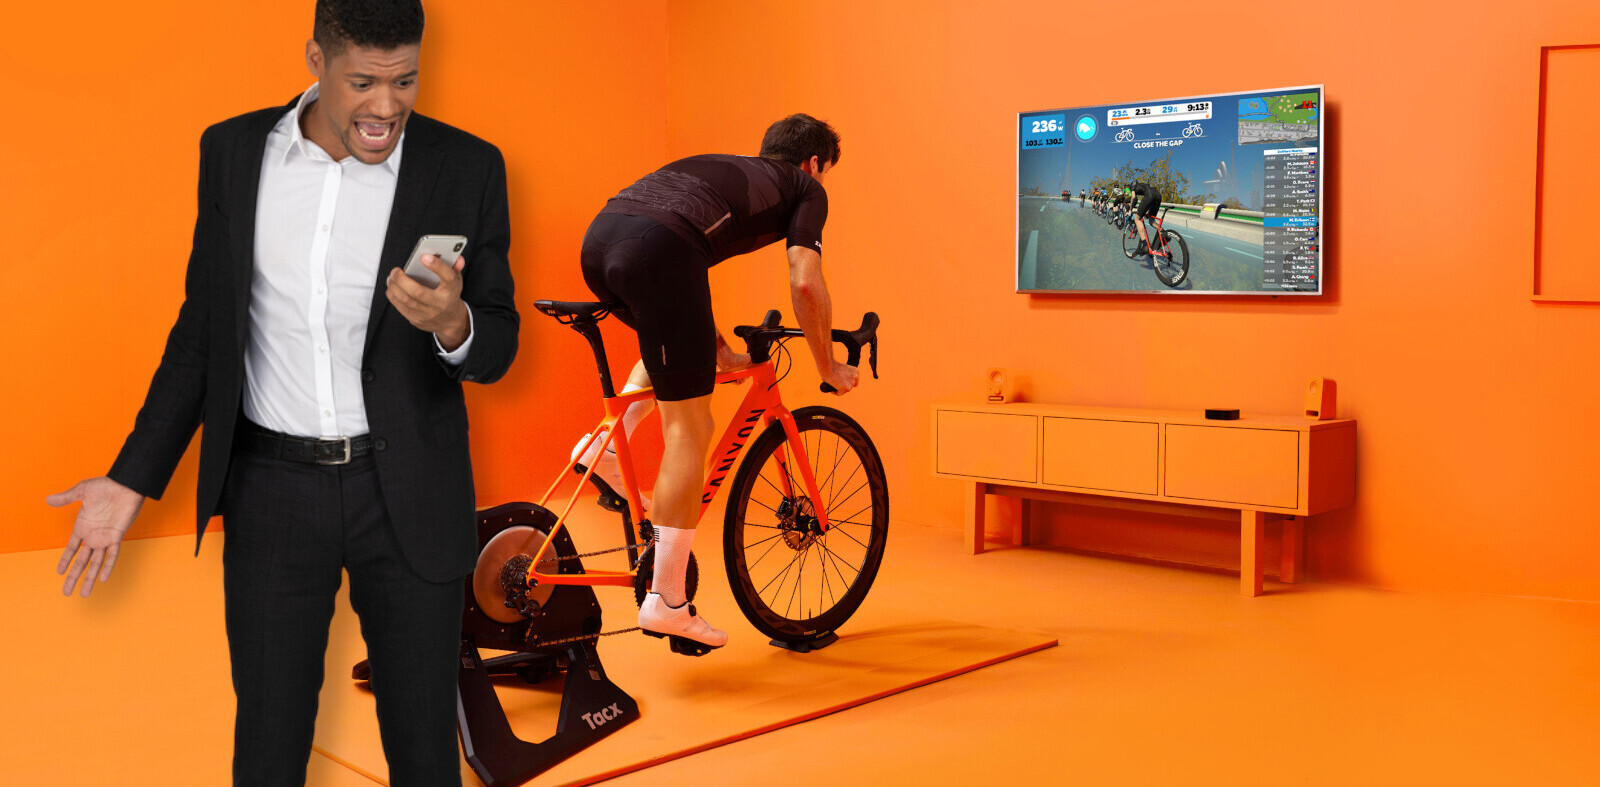 Zwift companion app not working? Try this